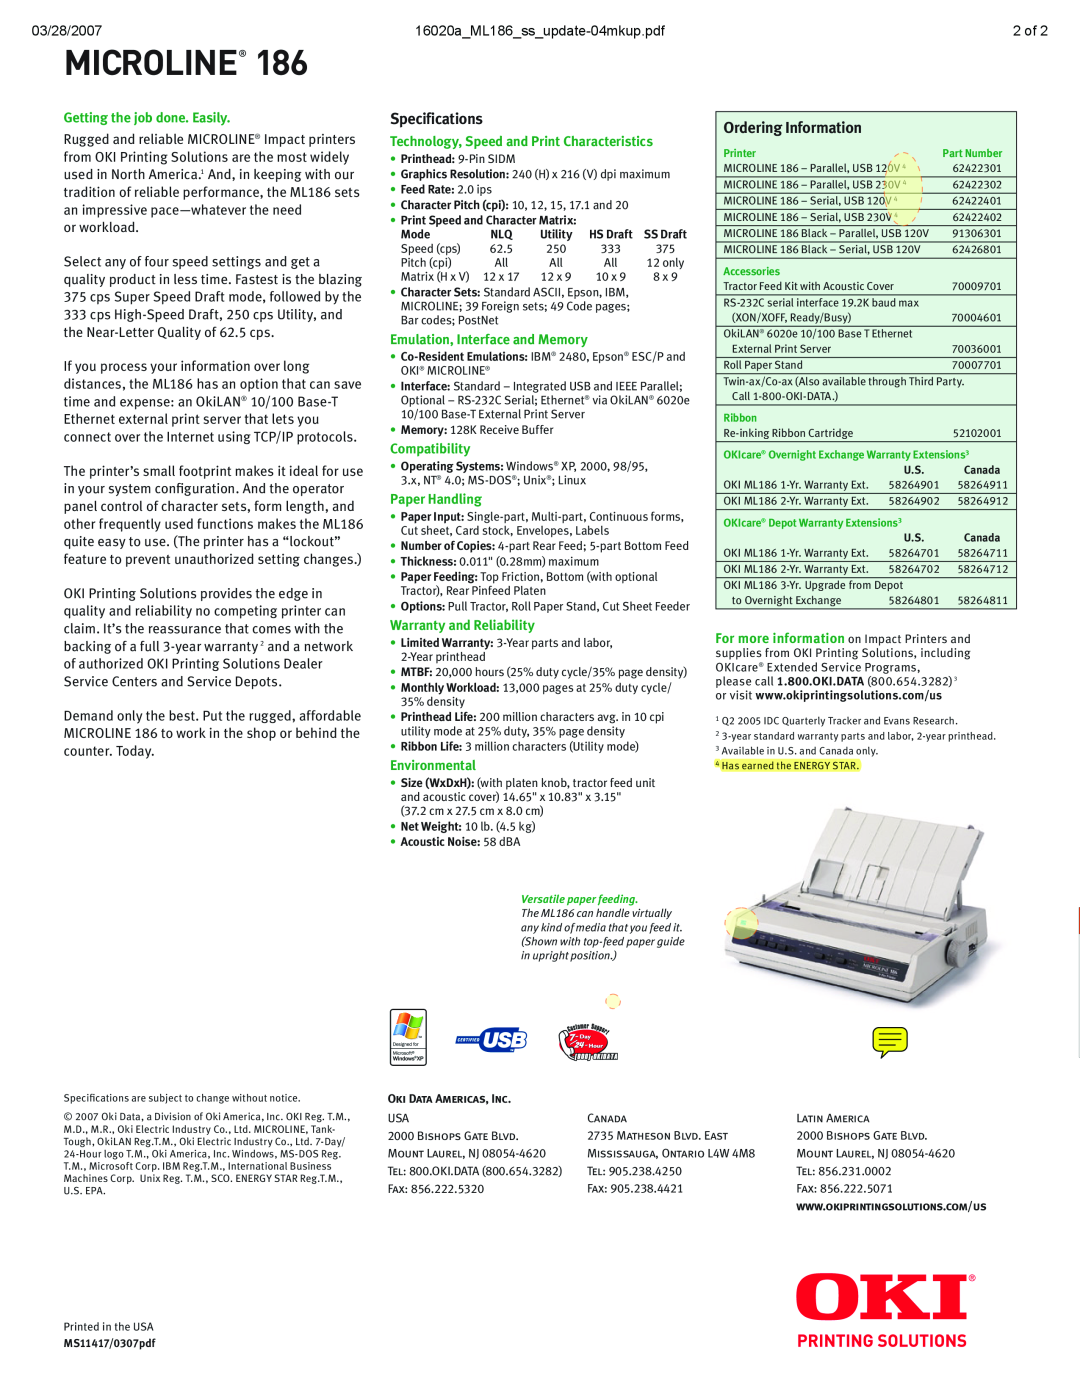 Oki 186 warranty Getting the job done. Easily, Technology, Speed and Print Characteristics, Emulation, Interface and Memory 